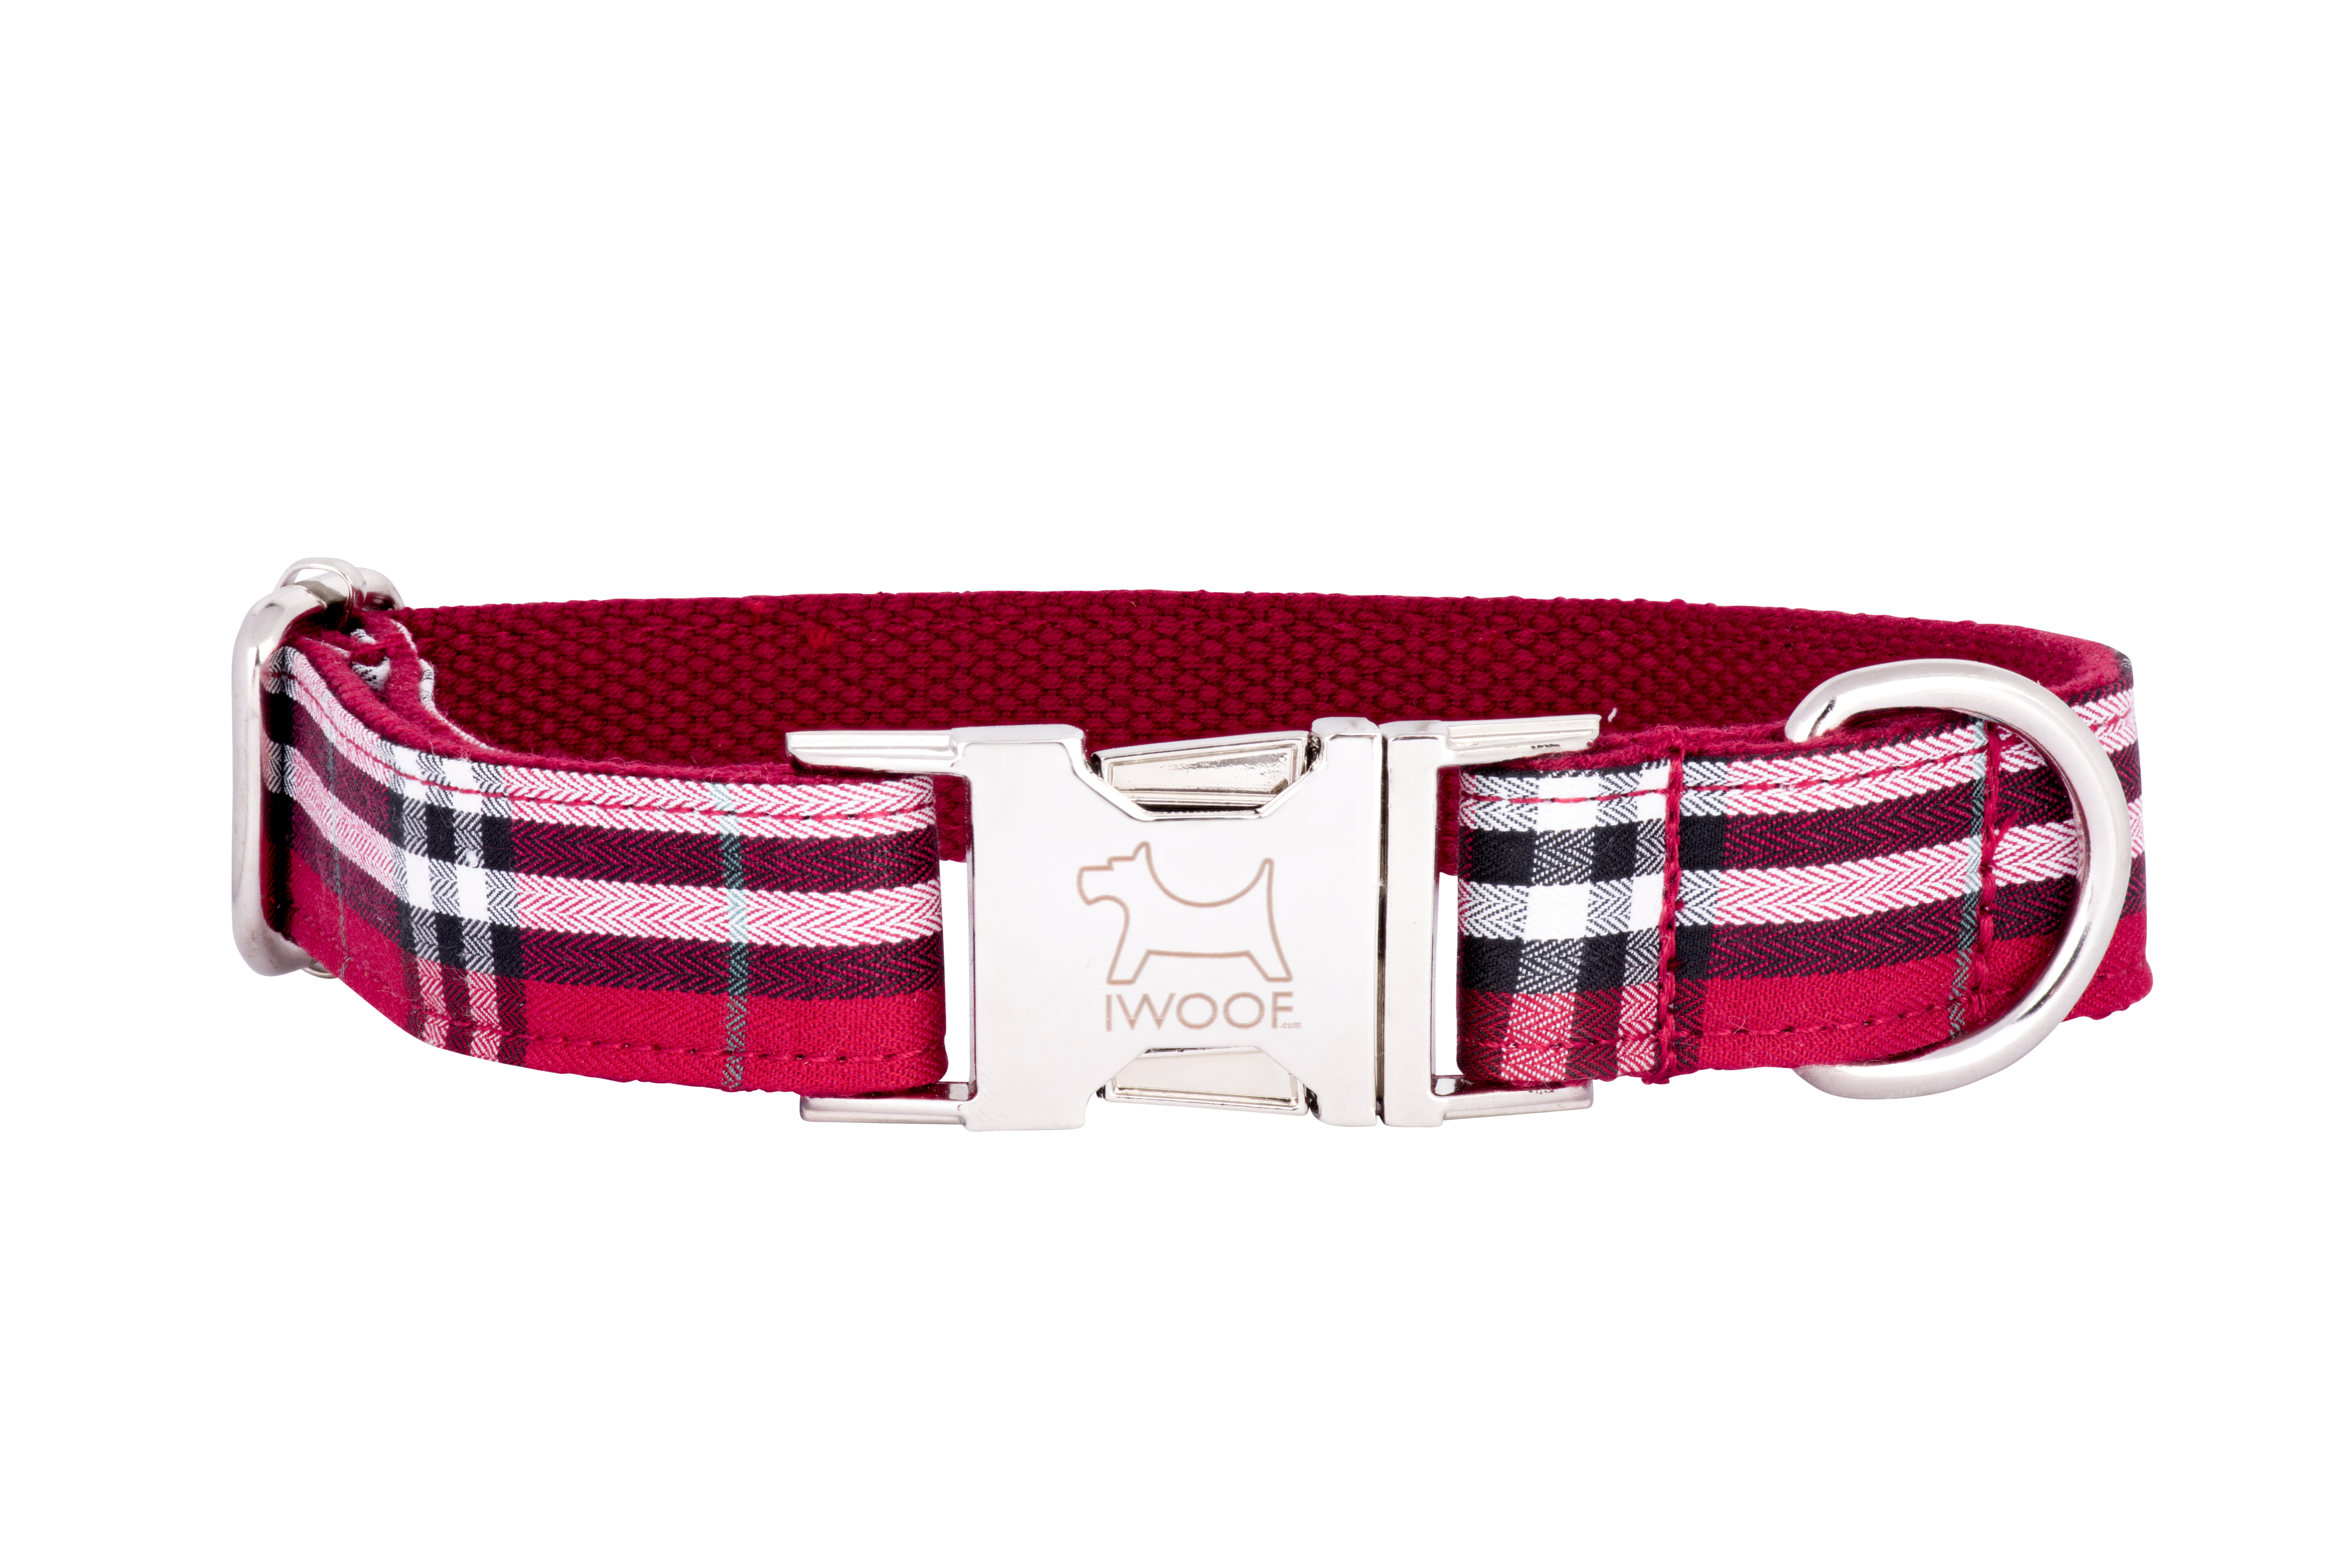 Tomato designer dog collar and dog lead set by IWOOF